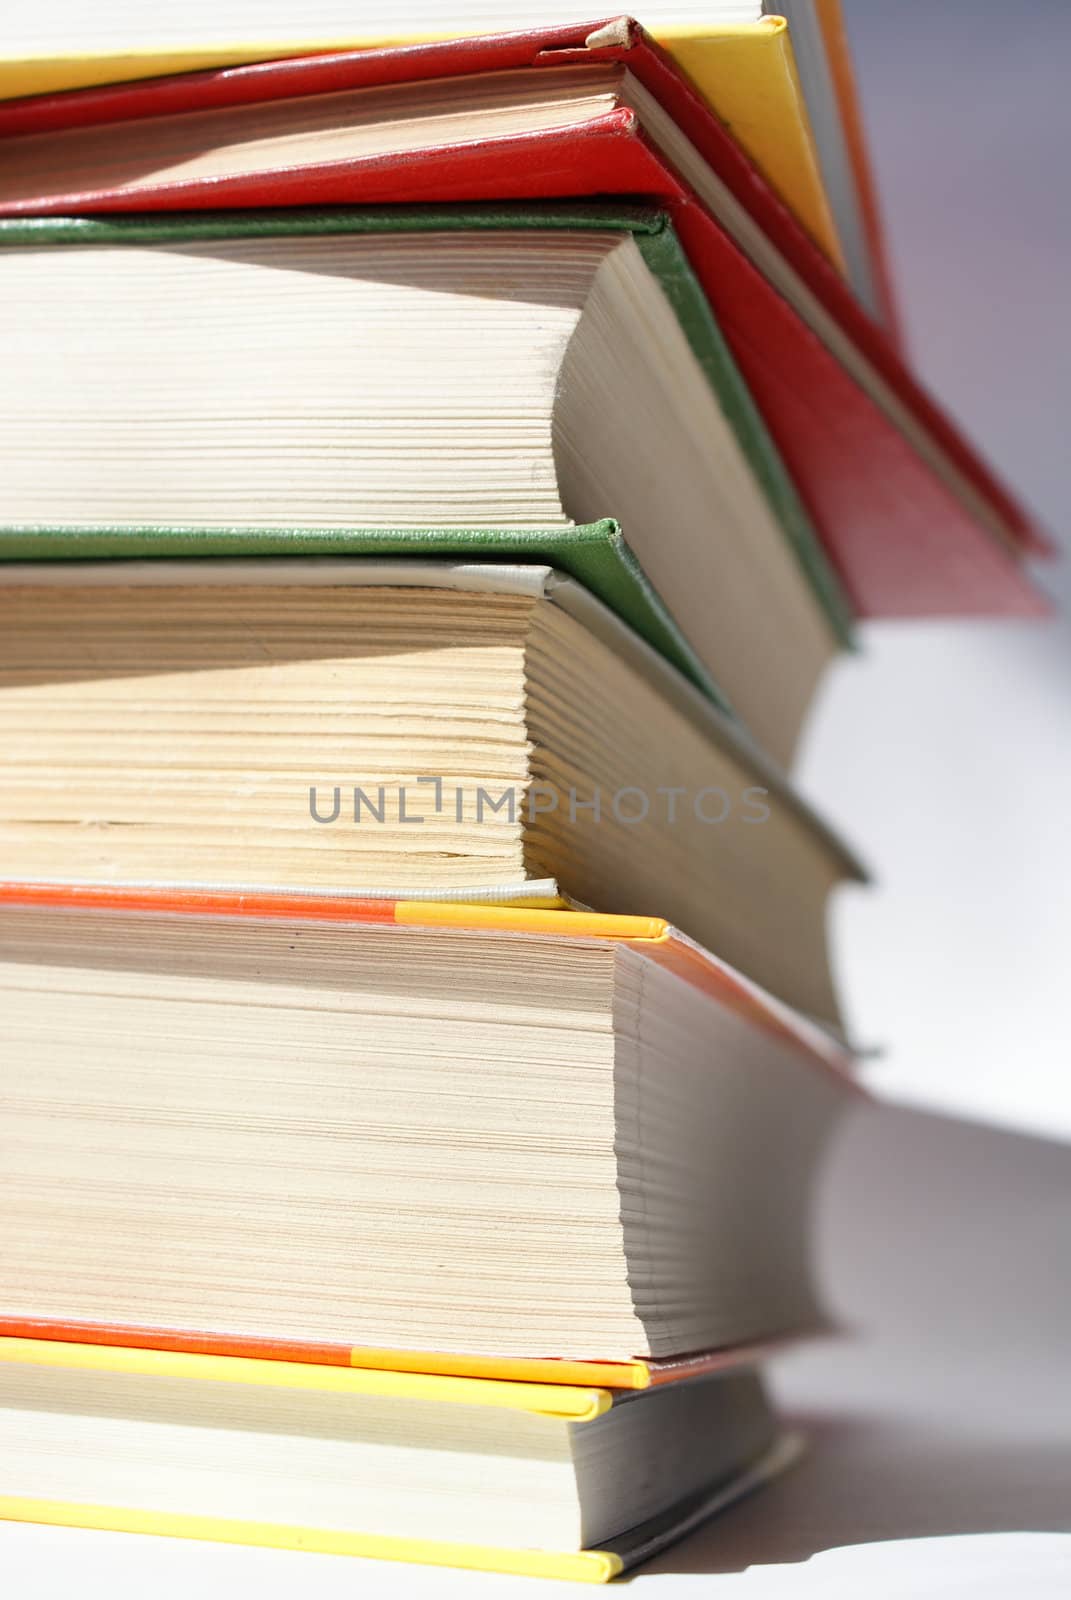 books of different colors stacked and shot in a closeup